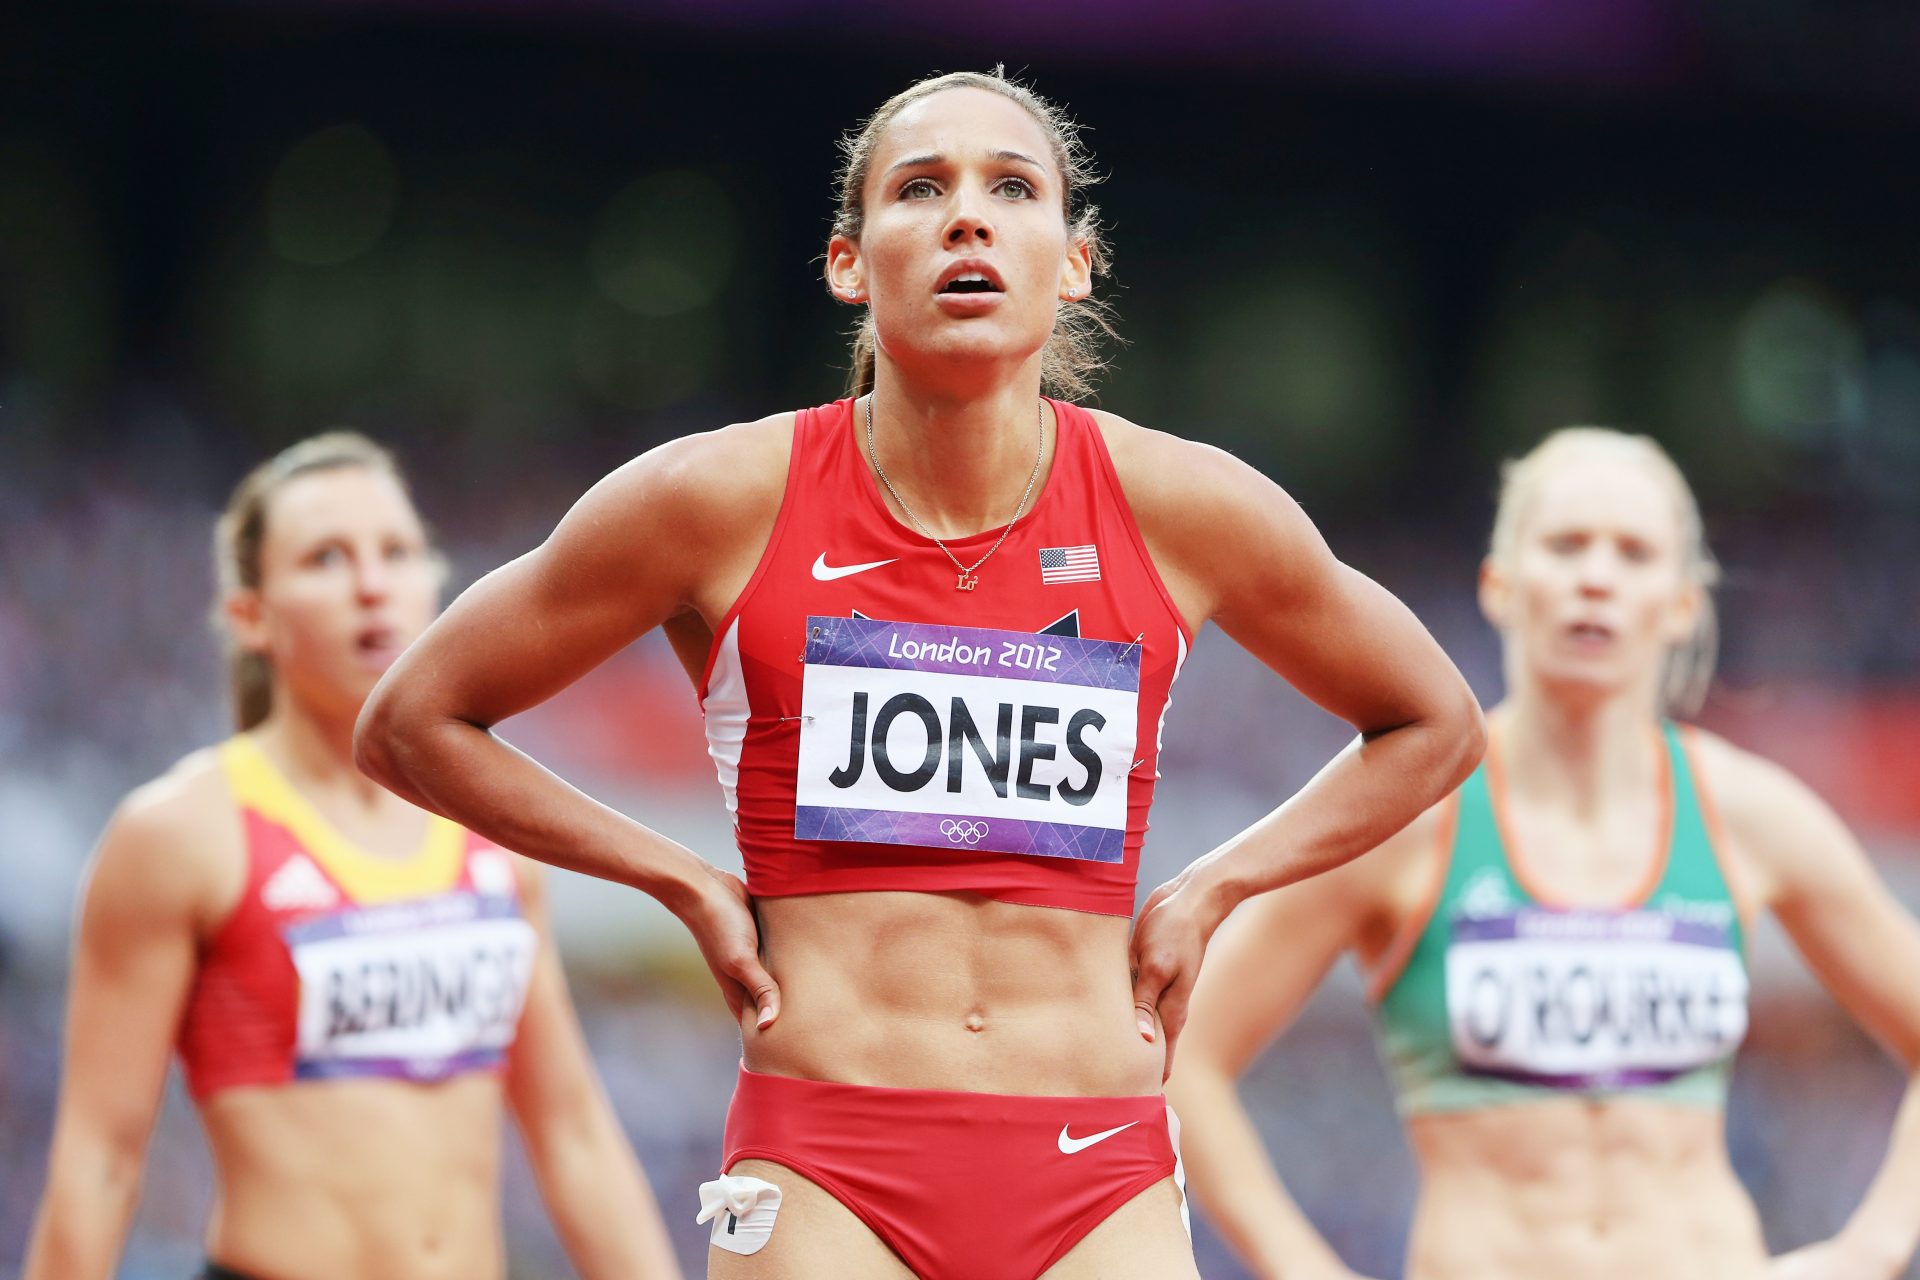 The tragic event that changed Lolo Jones' life forever